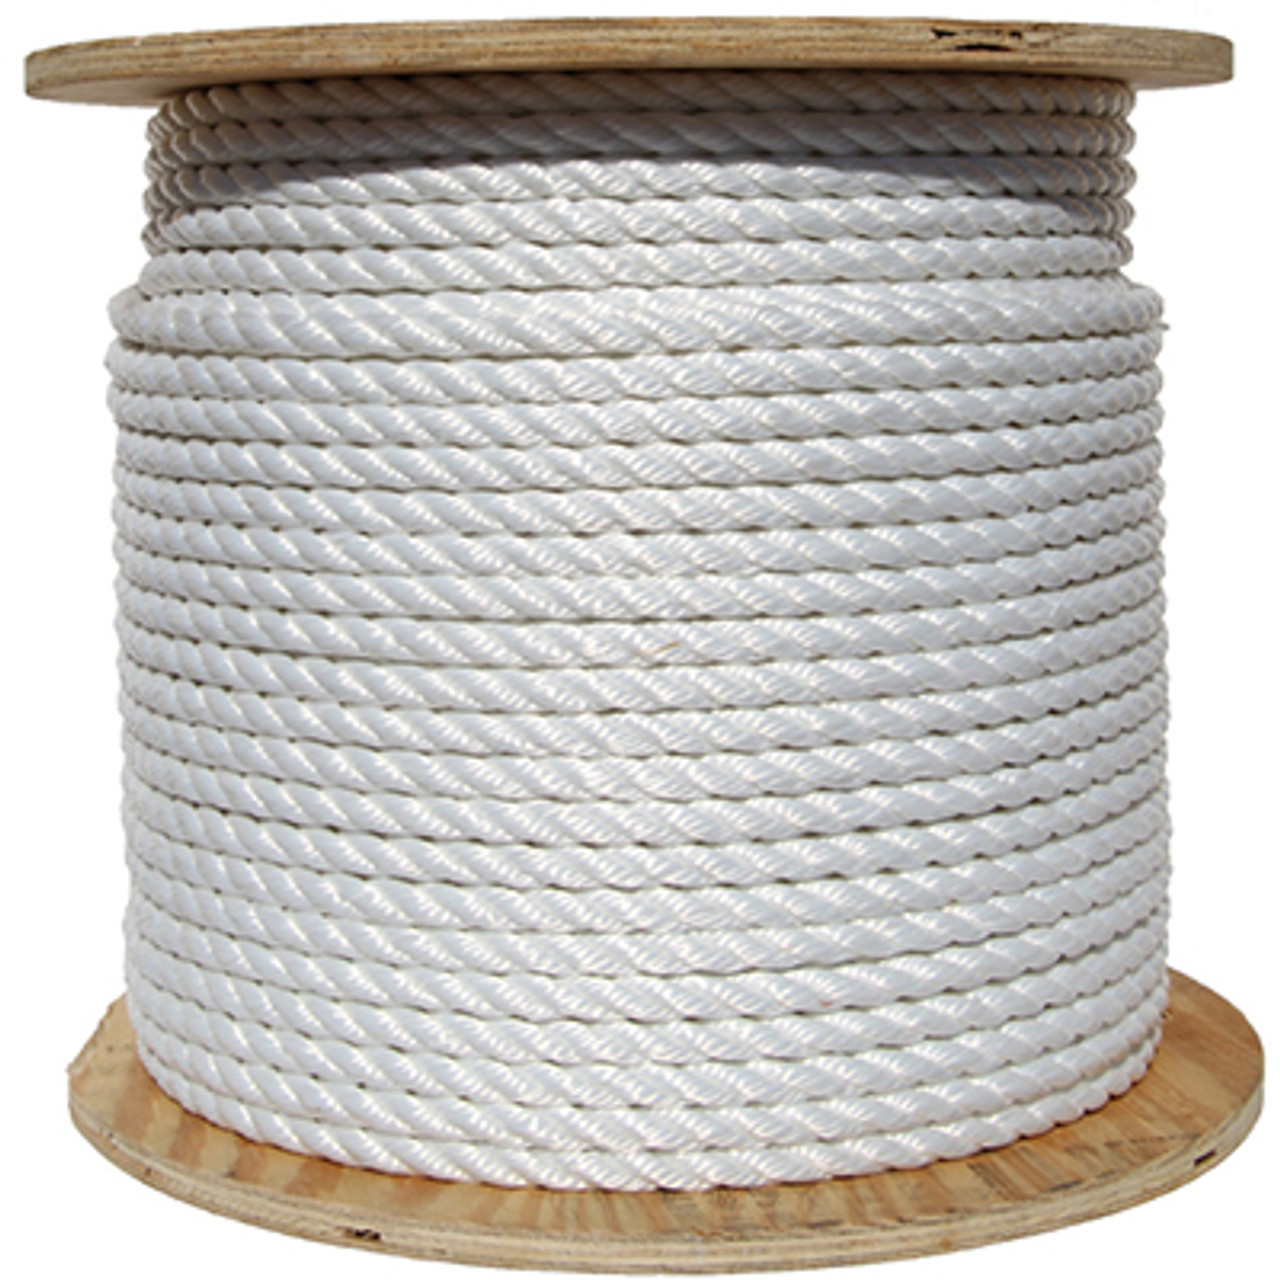 3/8 Inch Flagpole Rope Spool (1000 ft)